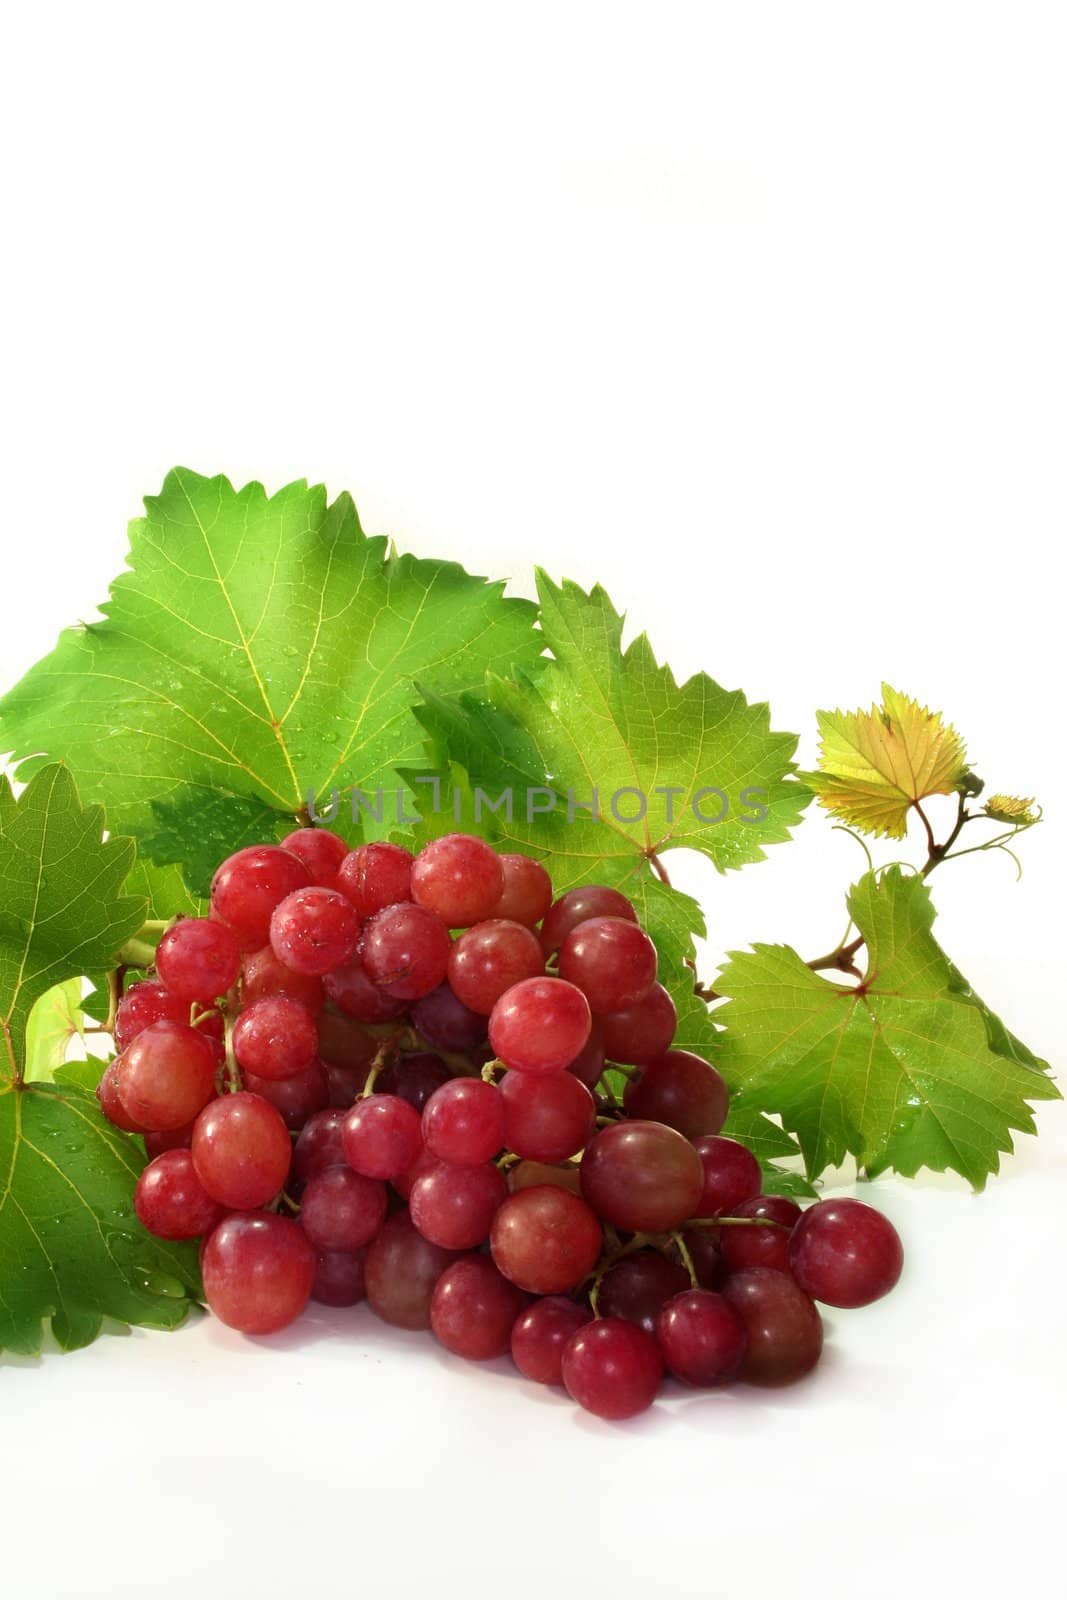 Grapes and vine leaves on a white background